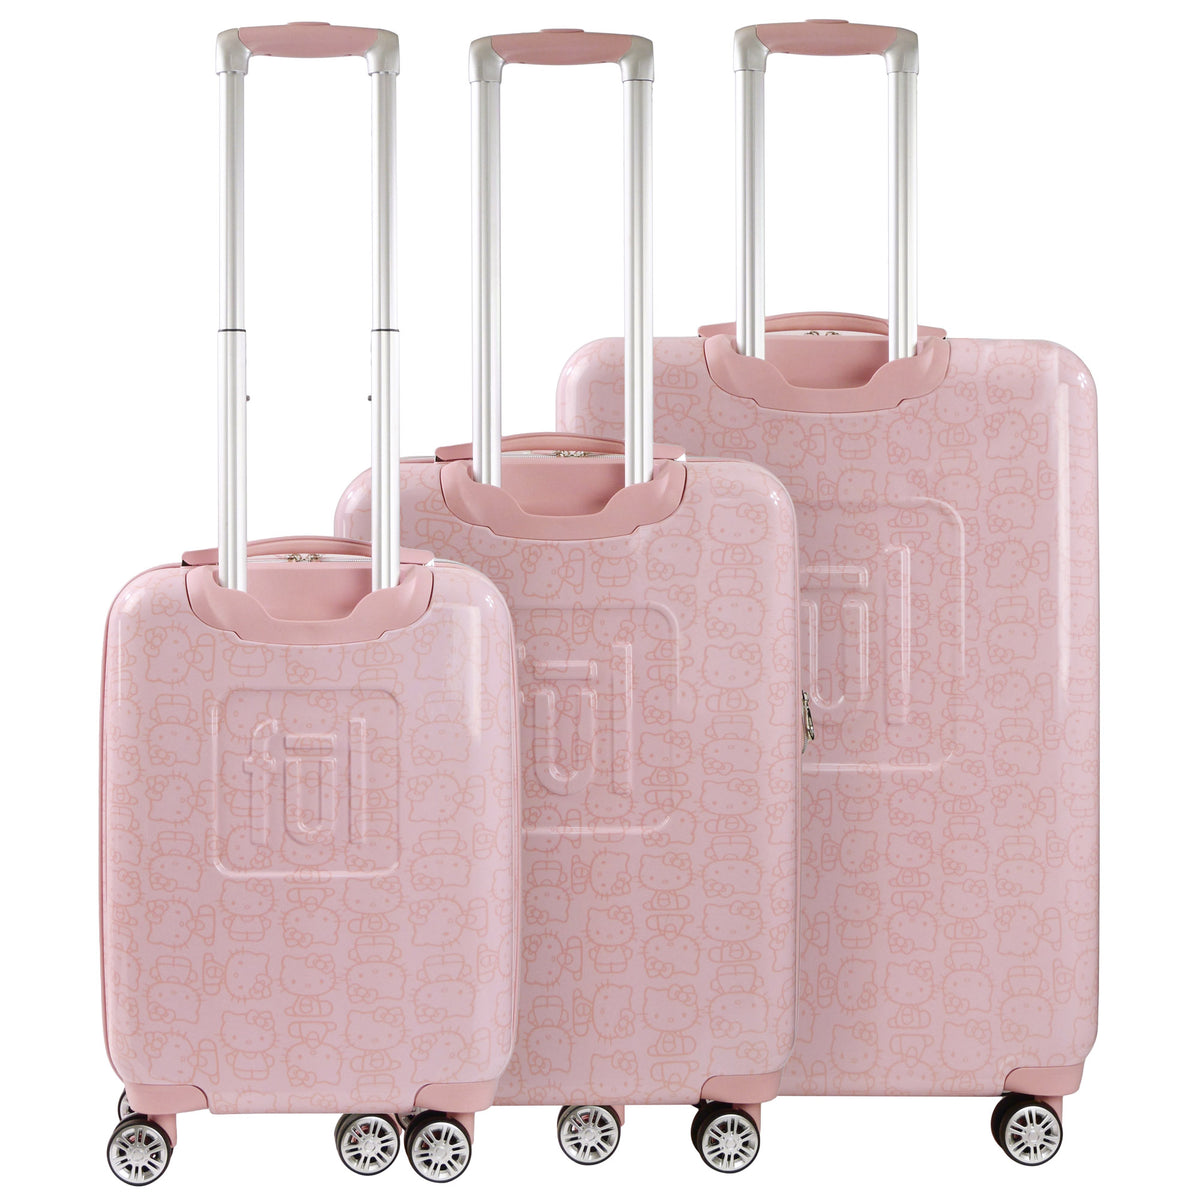 Hello Kitty x FUL 3-Piece Hardshell Luggage Set in Pink Travel Concept One   